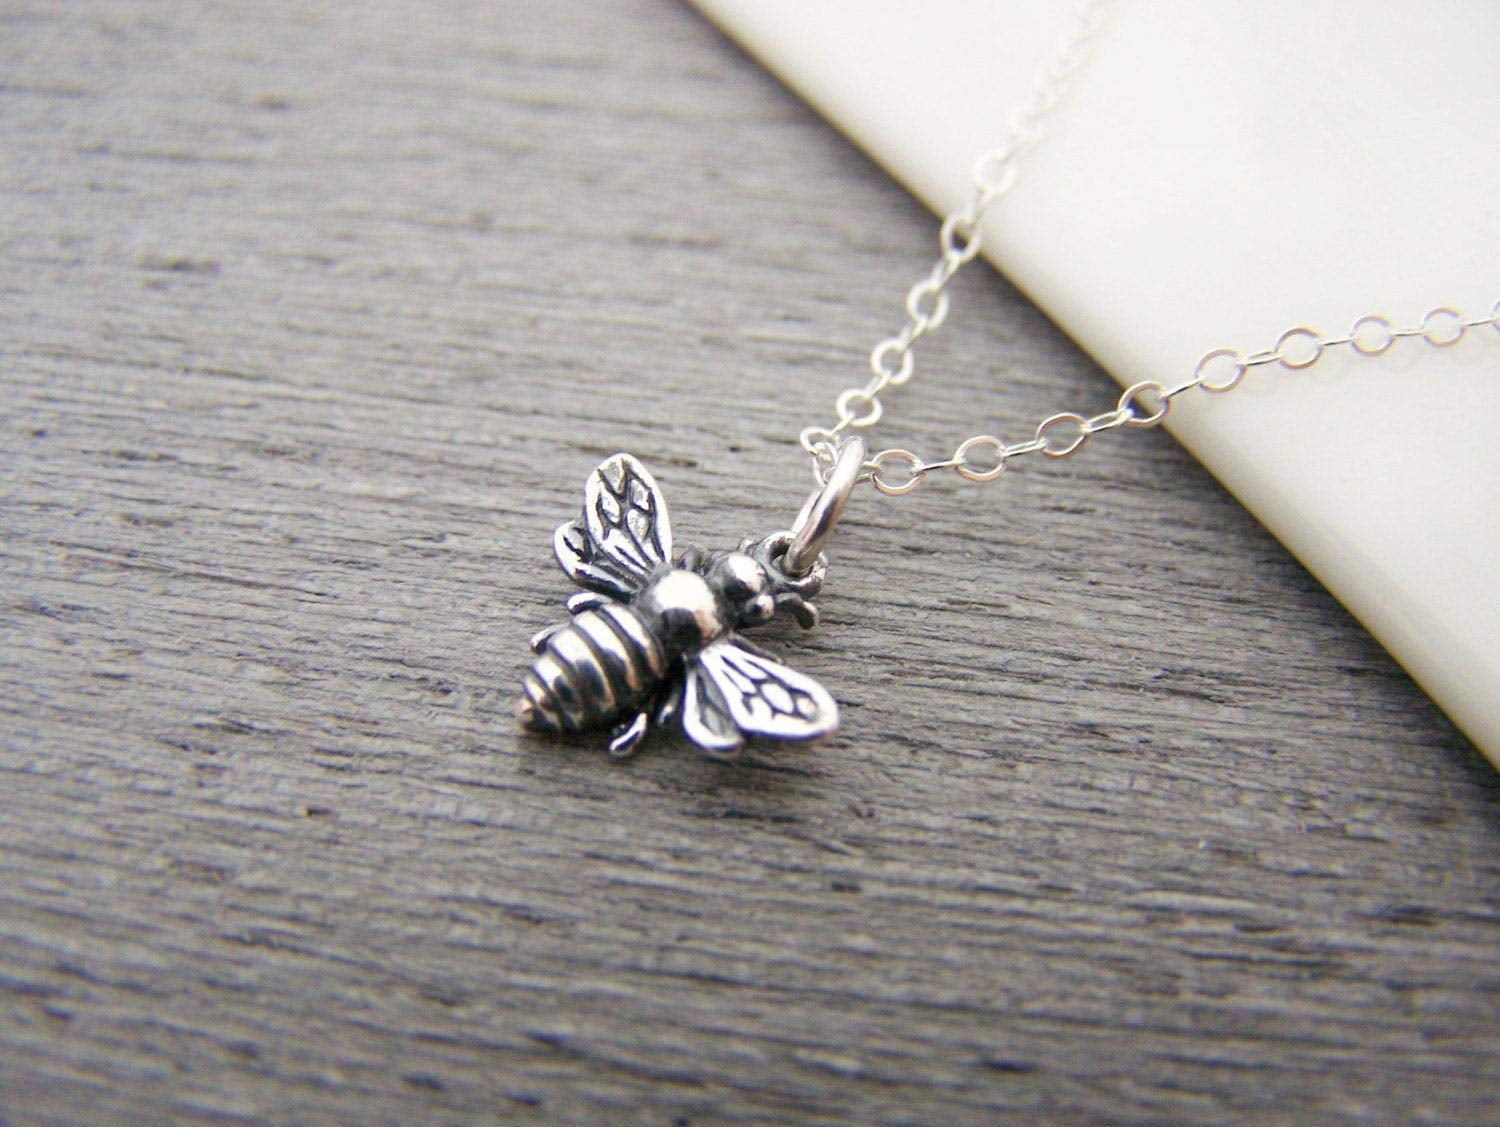 Bumble Bee Women 925 Sterling Silver Pendant FREE GIFT BOX